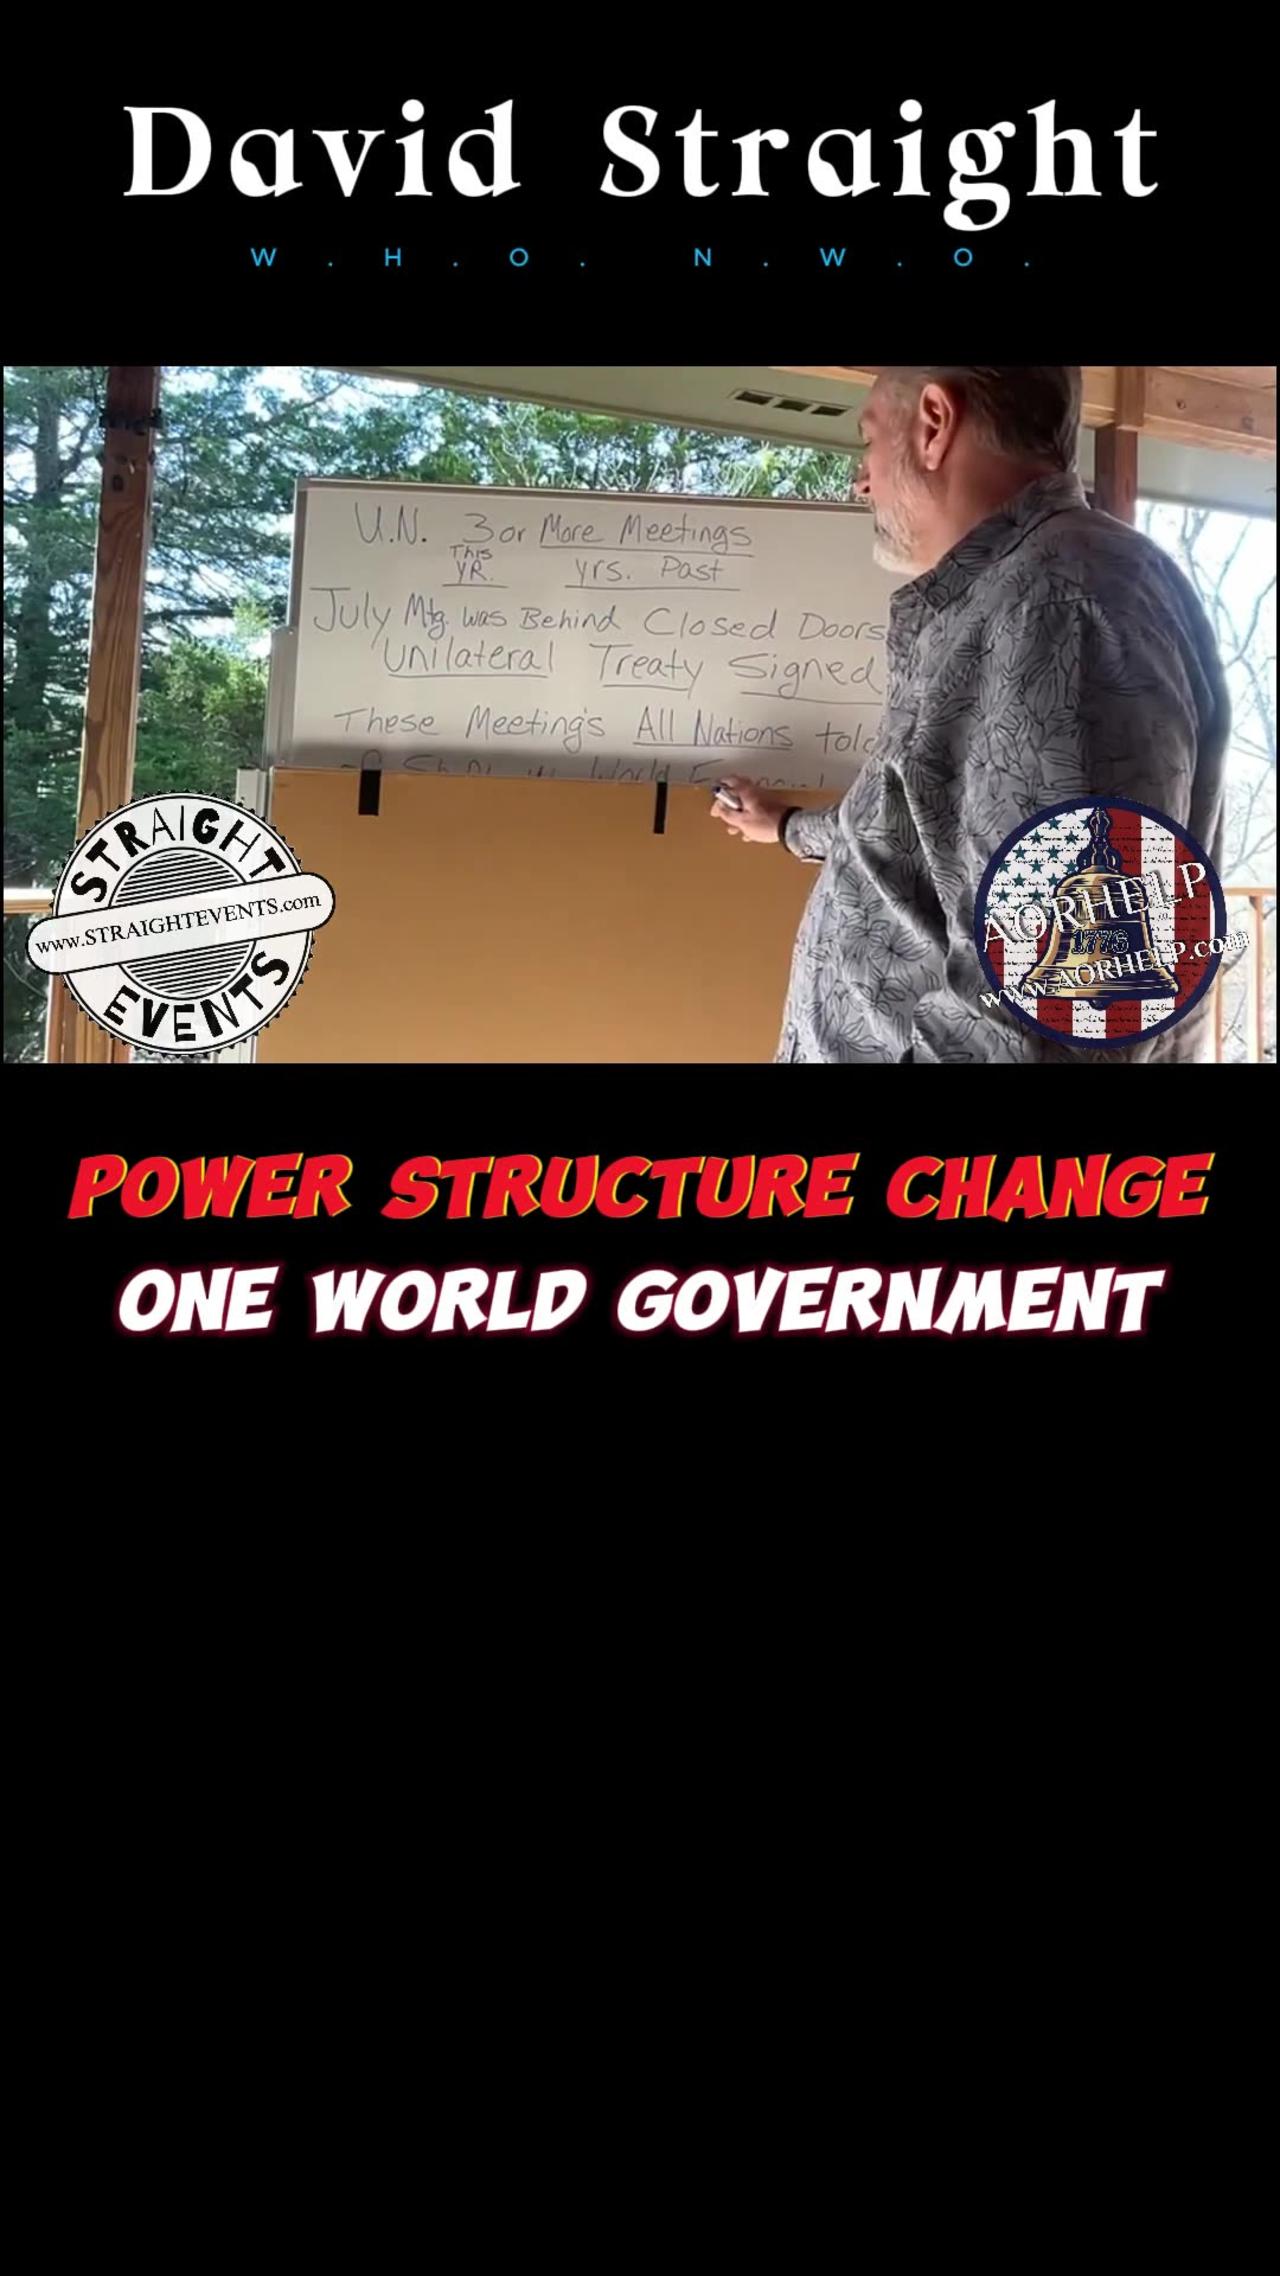 David Lester Straight-New System of Power In the World